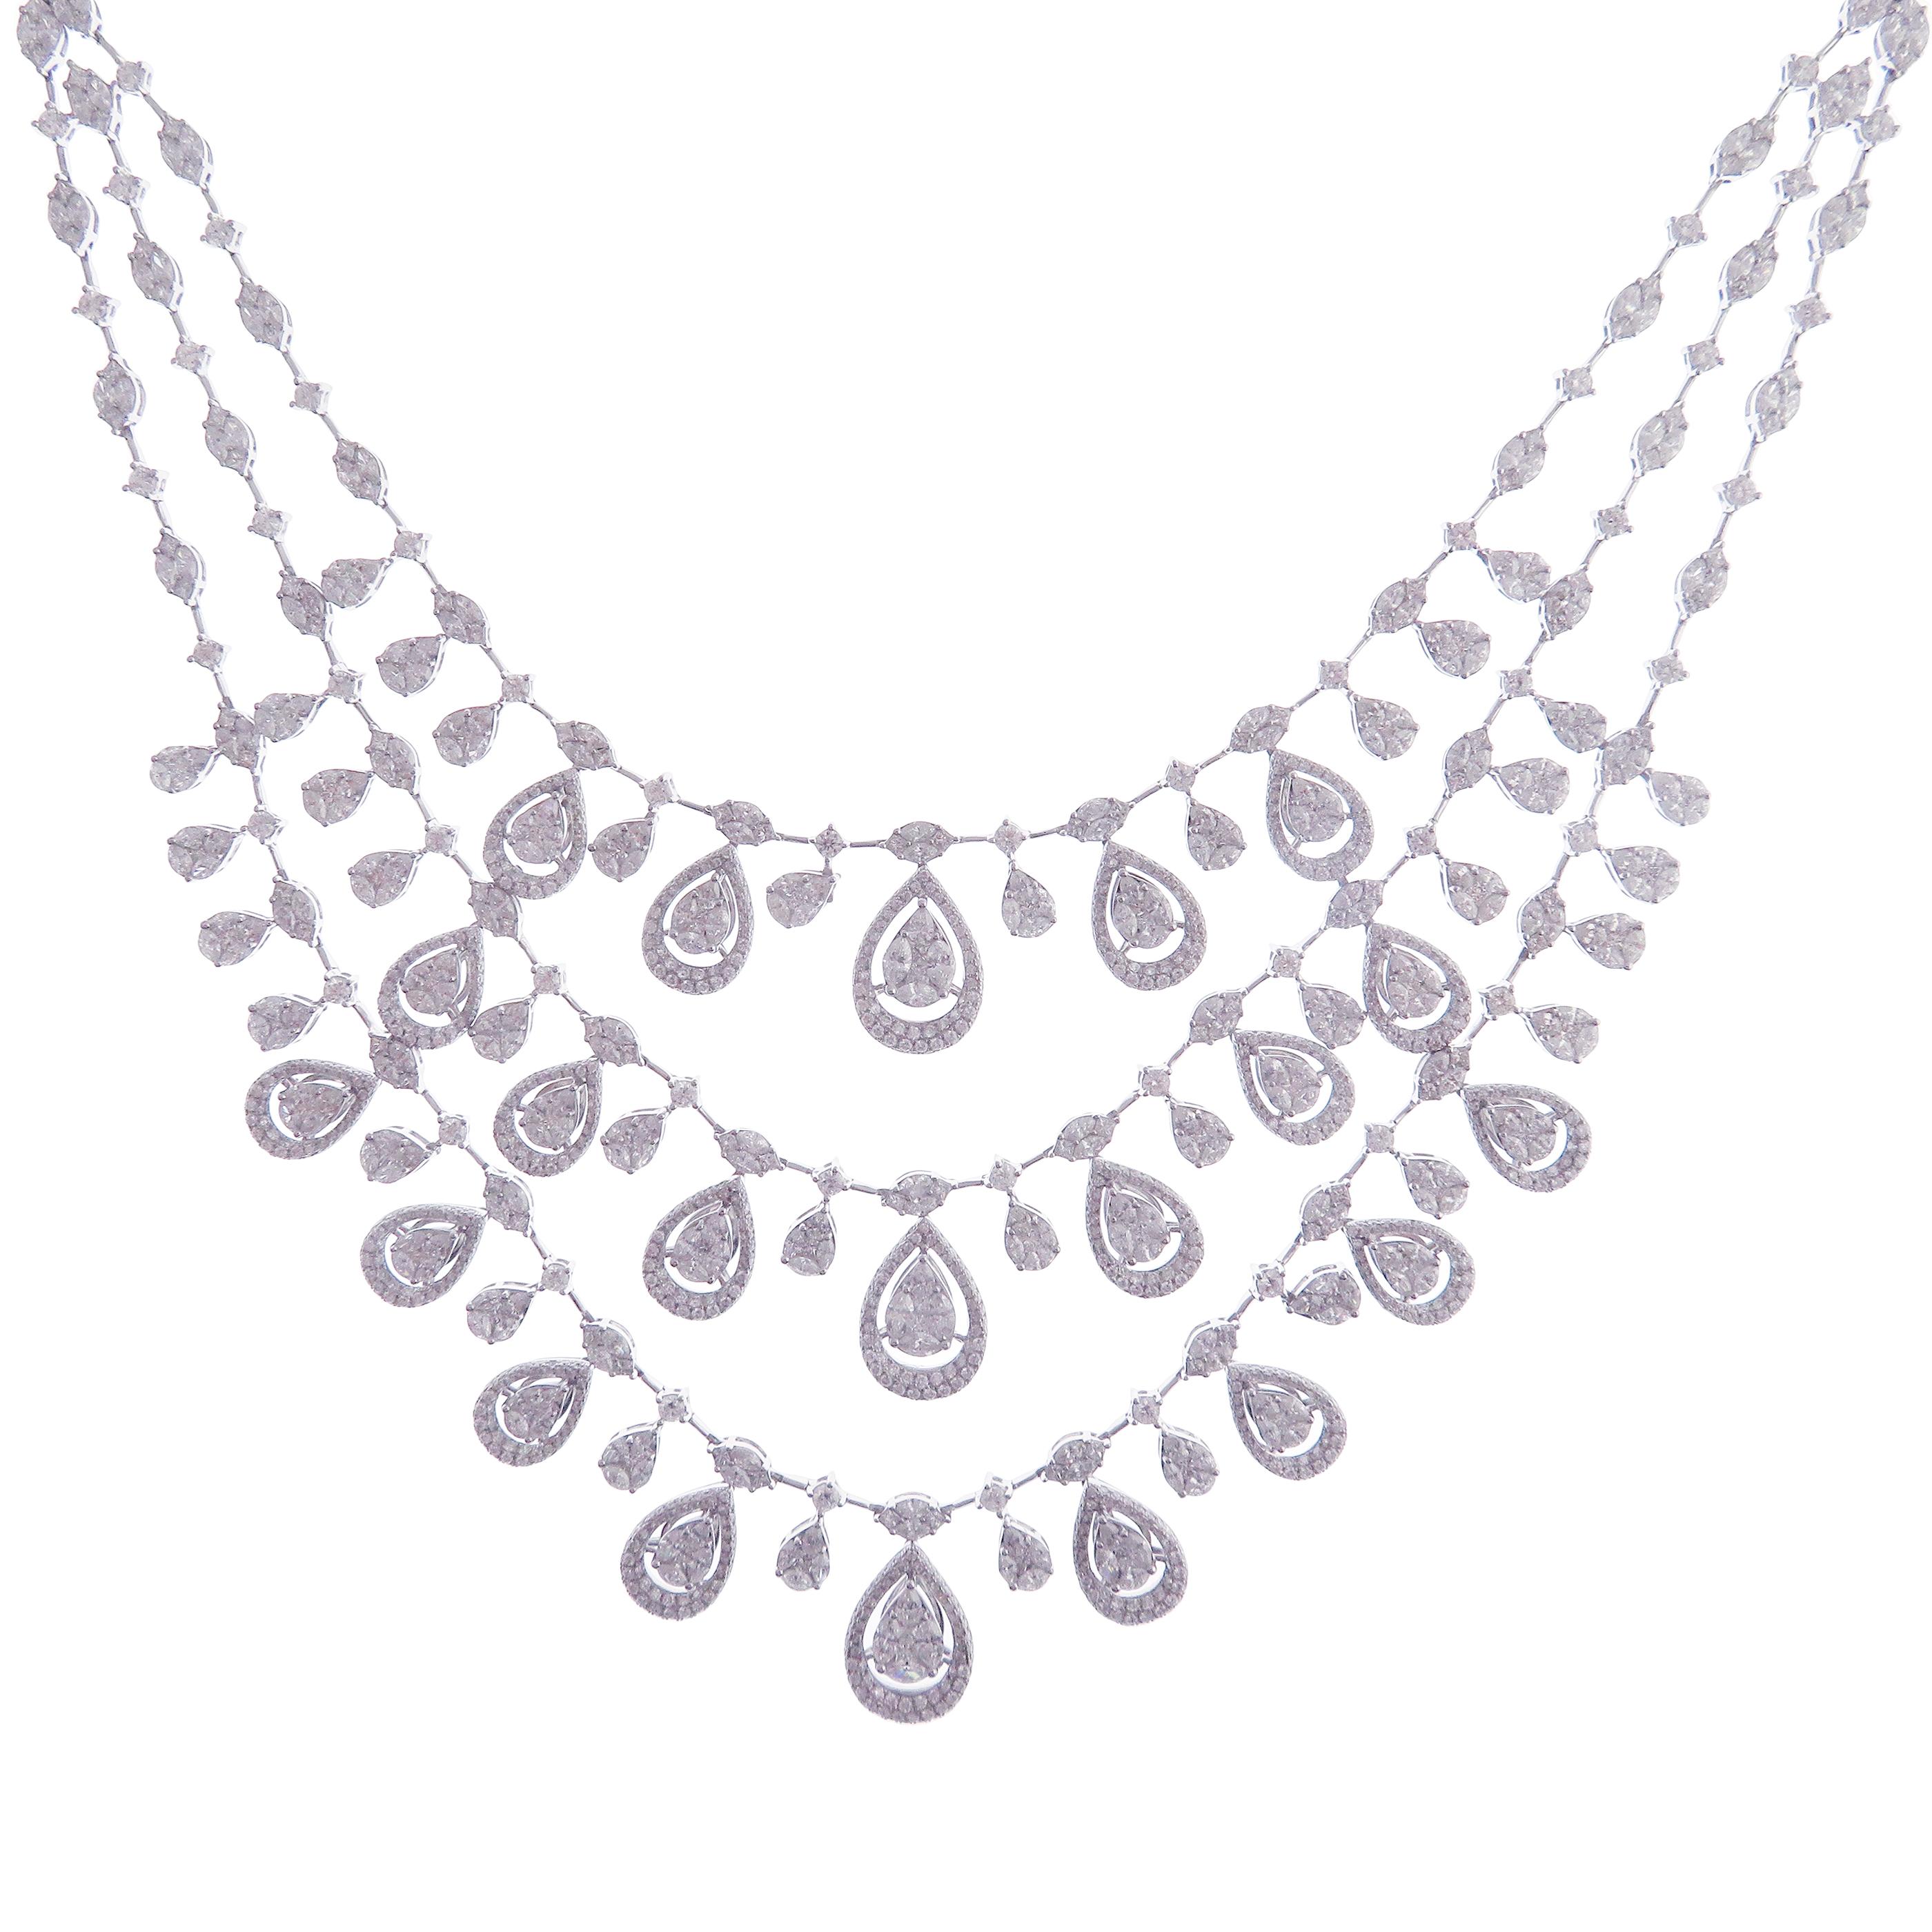 This fancy triple strand necklace is crafted in 18-karat white gold, weighing approximately 29 total carats of V Quality white diamond. These are very comfortable, flexible, and lay flat. This necklace is created with beautiful princess cut, pear